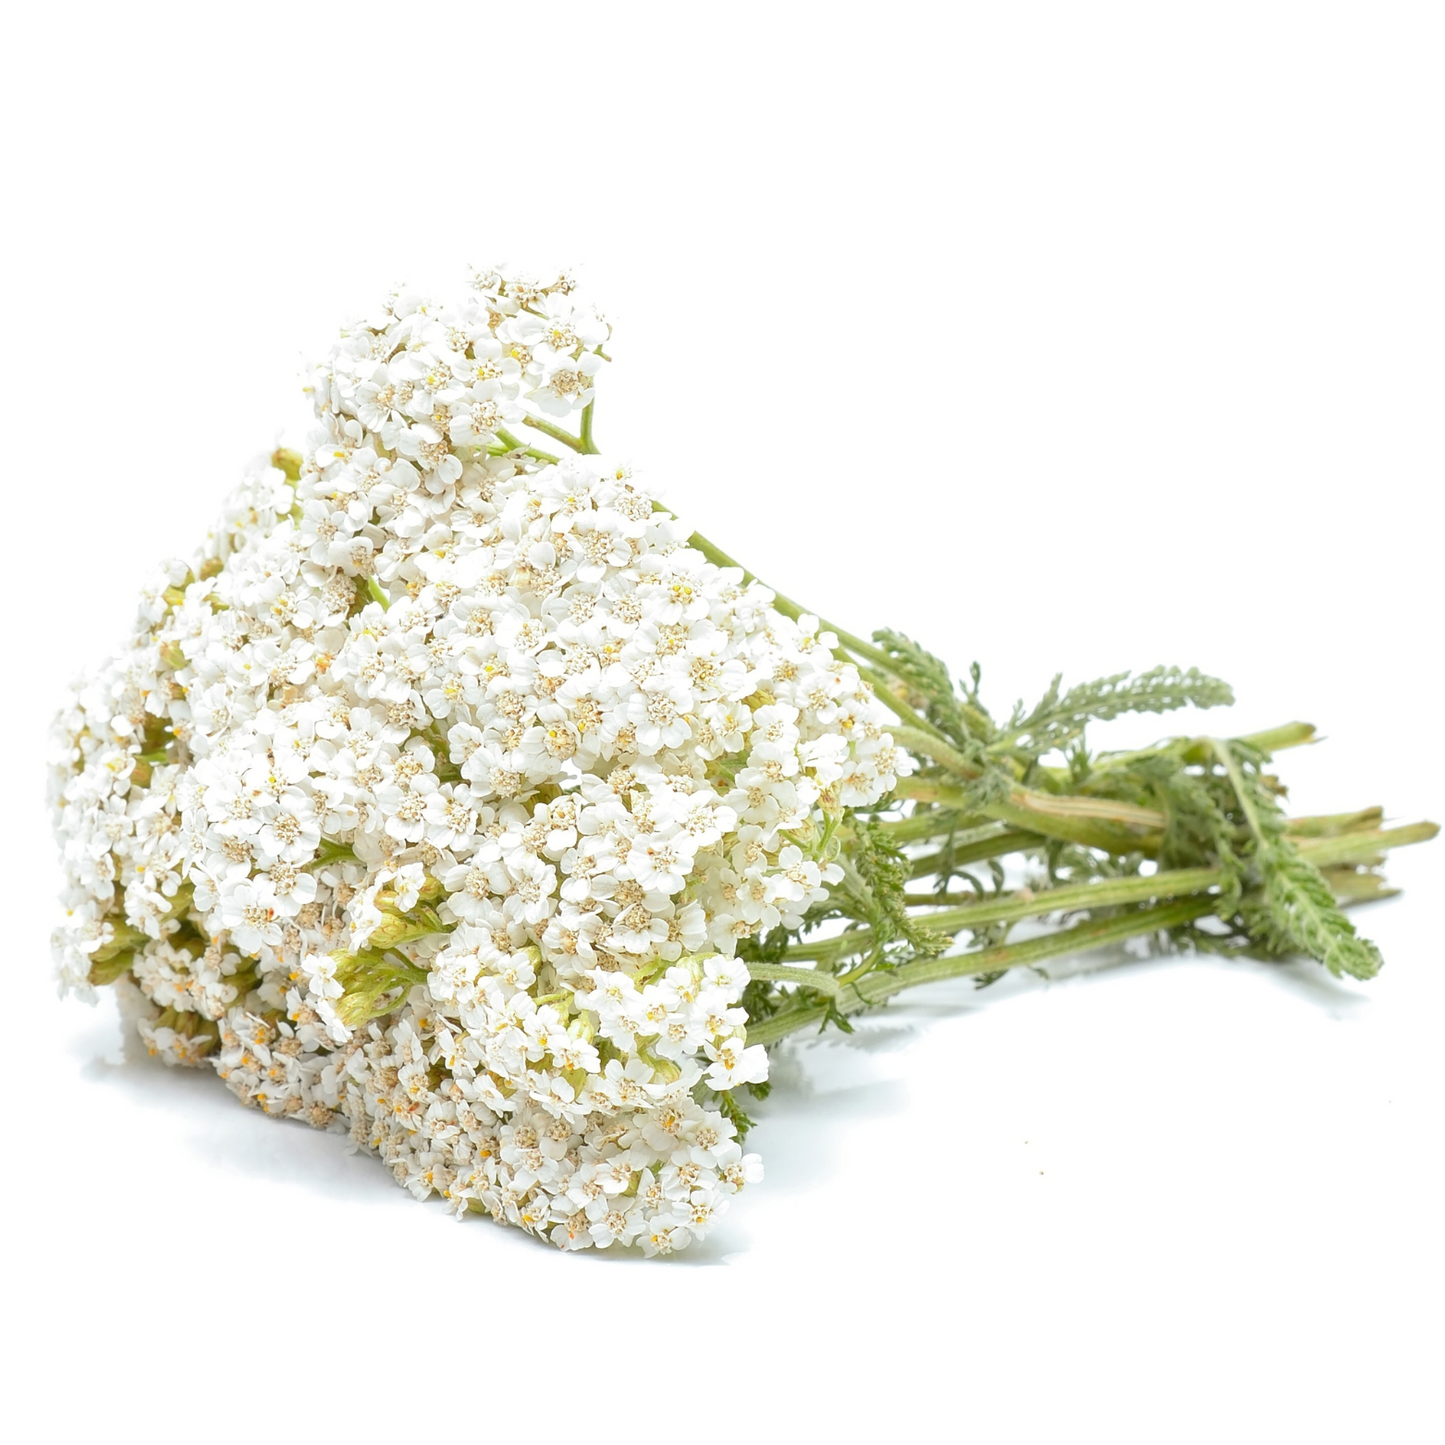 Yarrow Flowers Herb For Topical Wound Healing, Heighten Senses for Ritual and Intuition